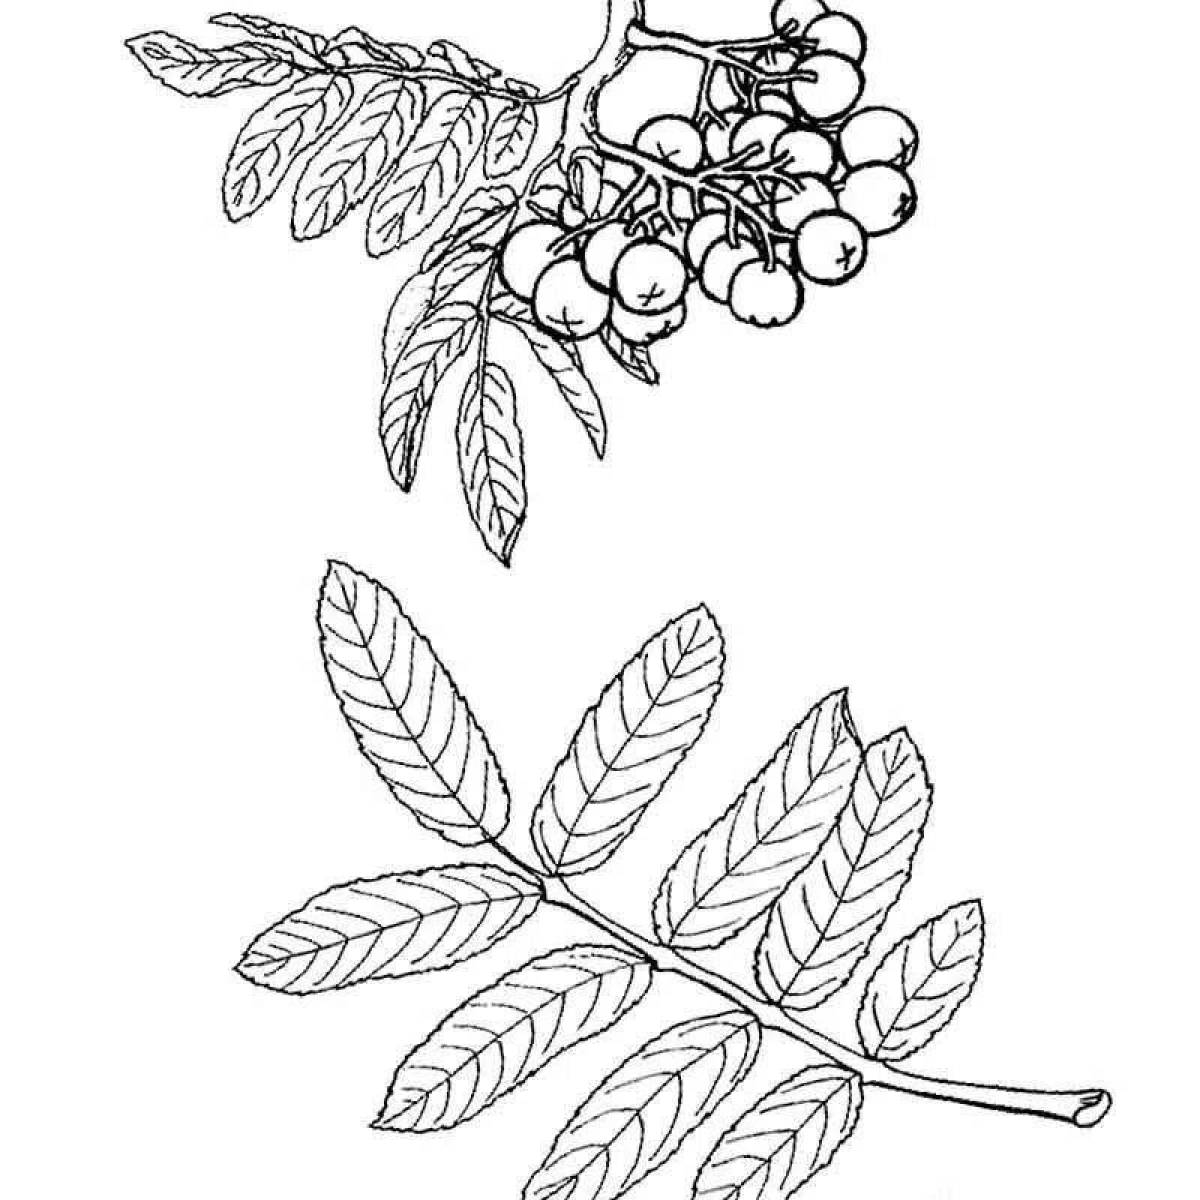 An interesting rowan twig coloring book for kids